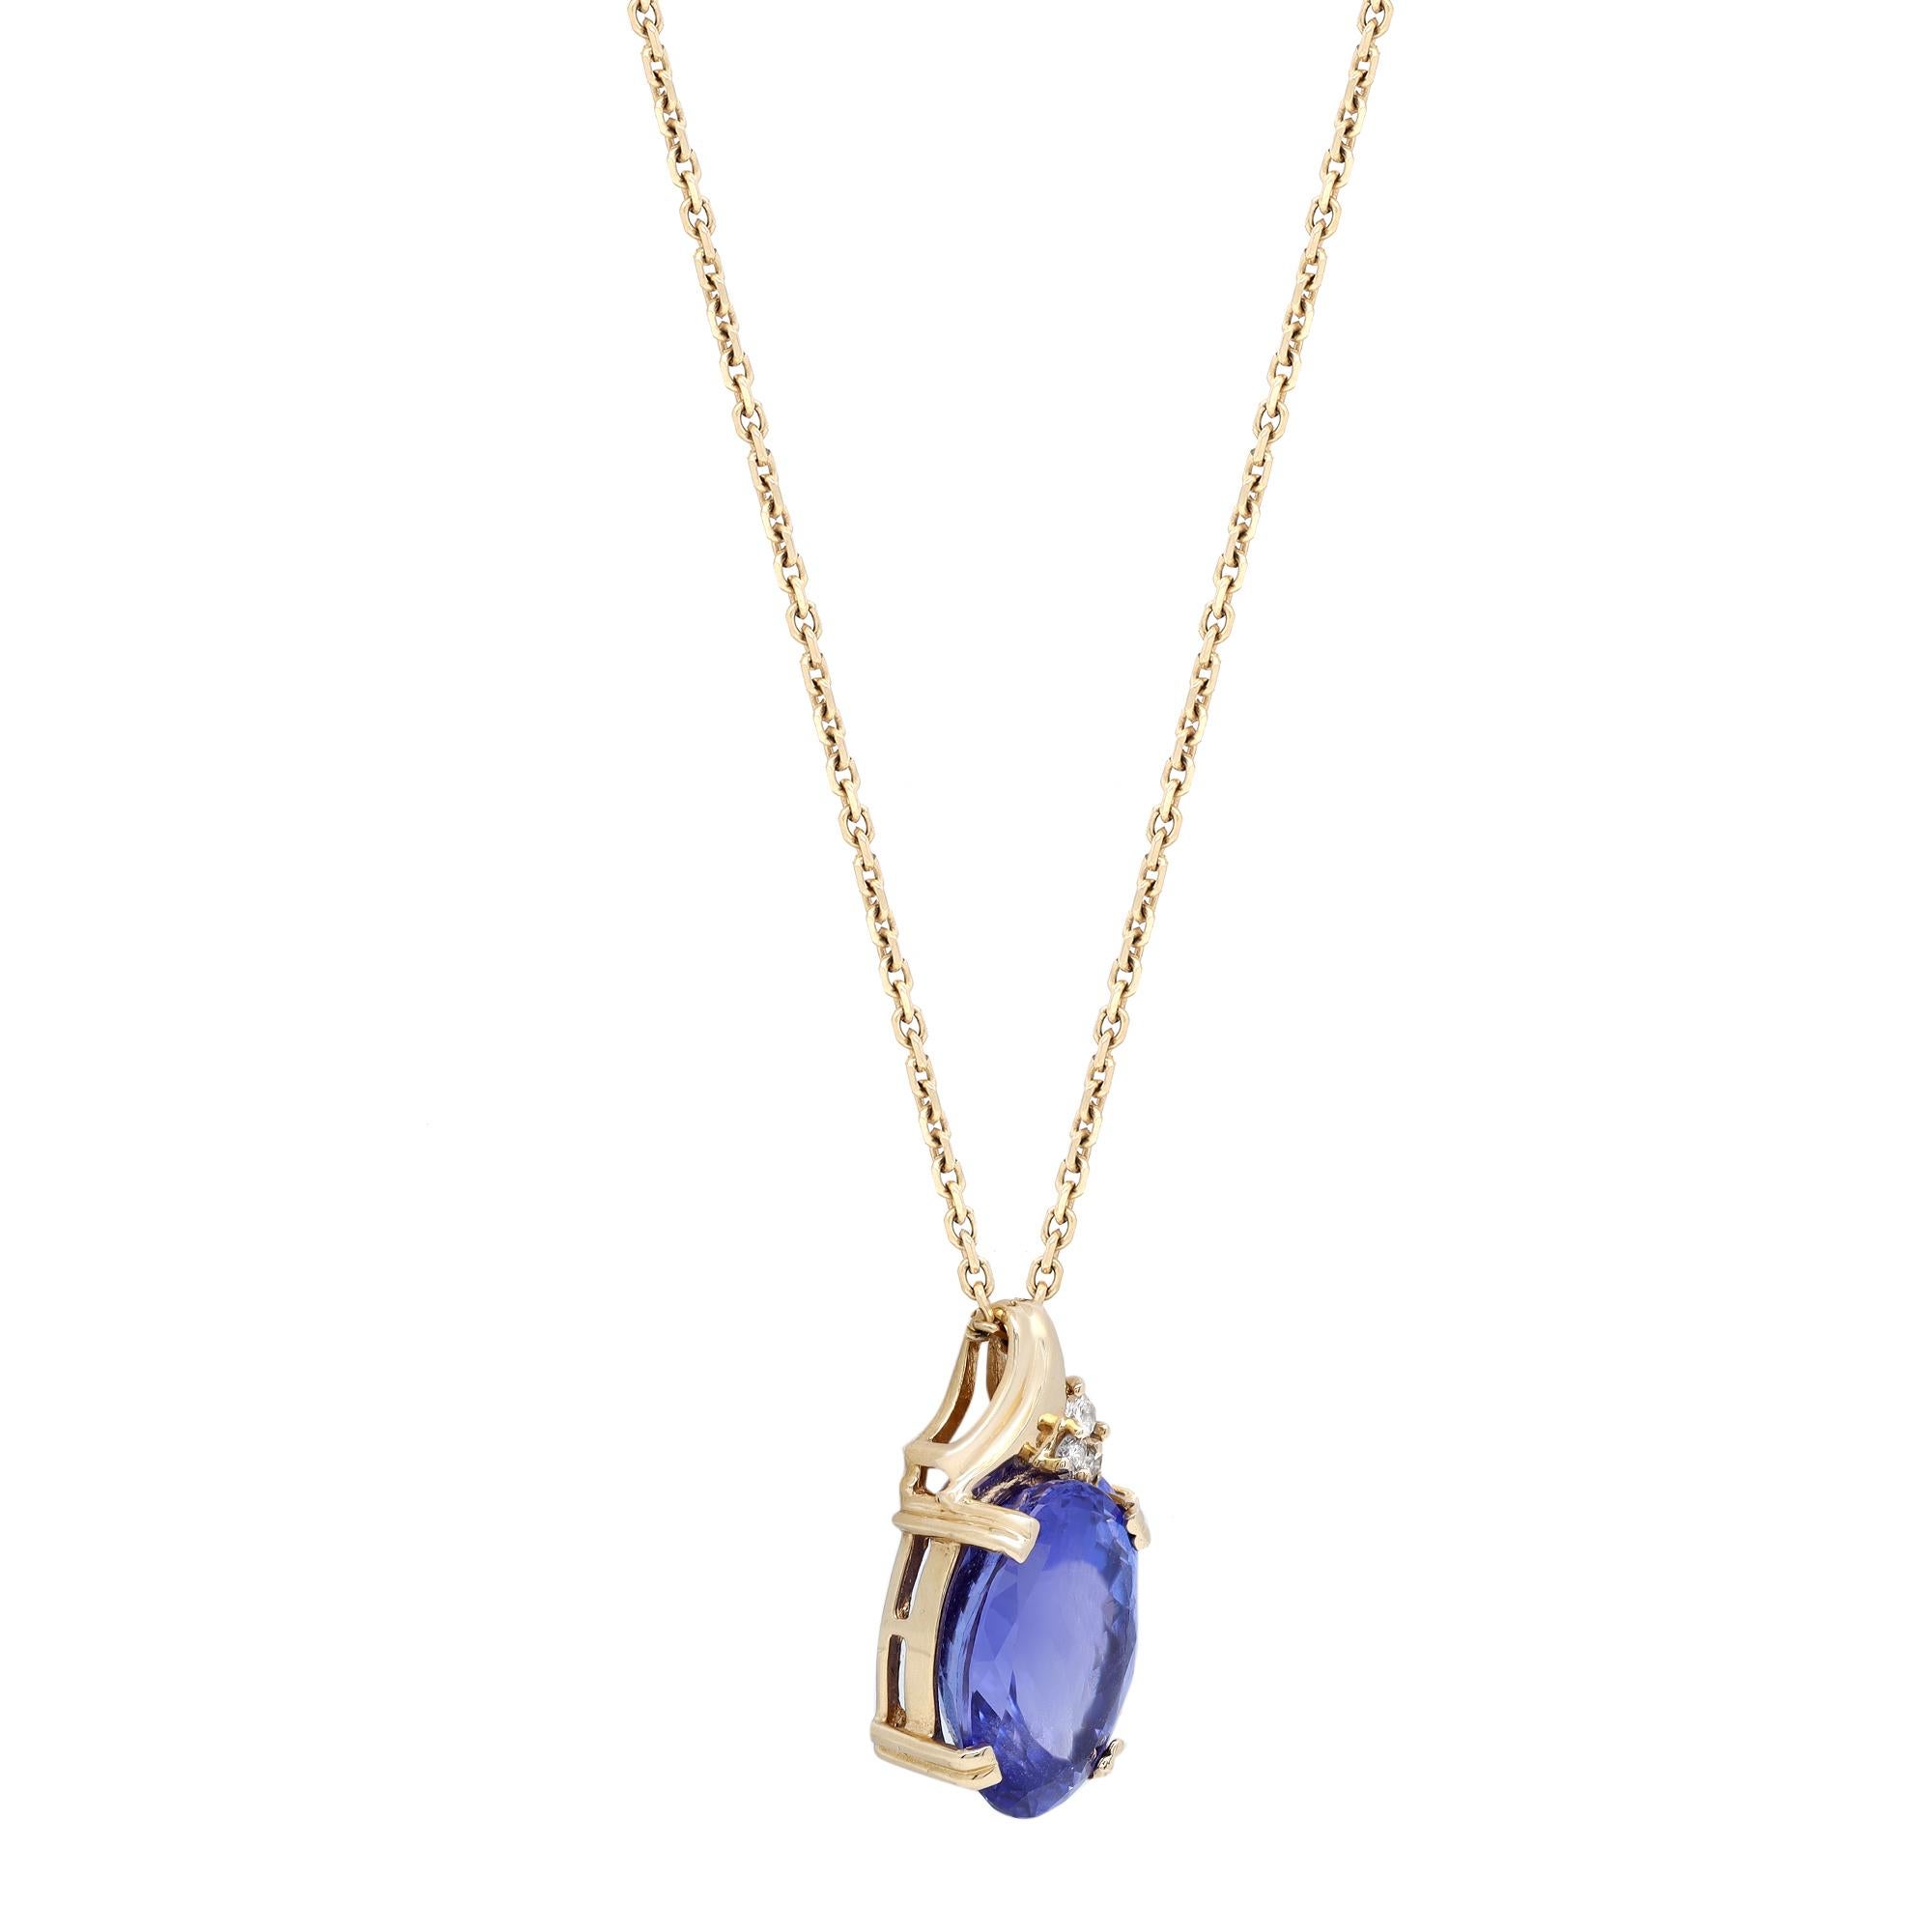 This beautiful Tanzanite and diamond pendant necklace is crafted in 14K yellow gold. The pendant features prong set 11.00 carats of oval shaped Tanzanite and 0.09 carat of round cut diamonds. Necklace length: 18 inches. Total weight: 9.55 grams.